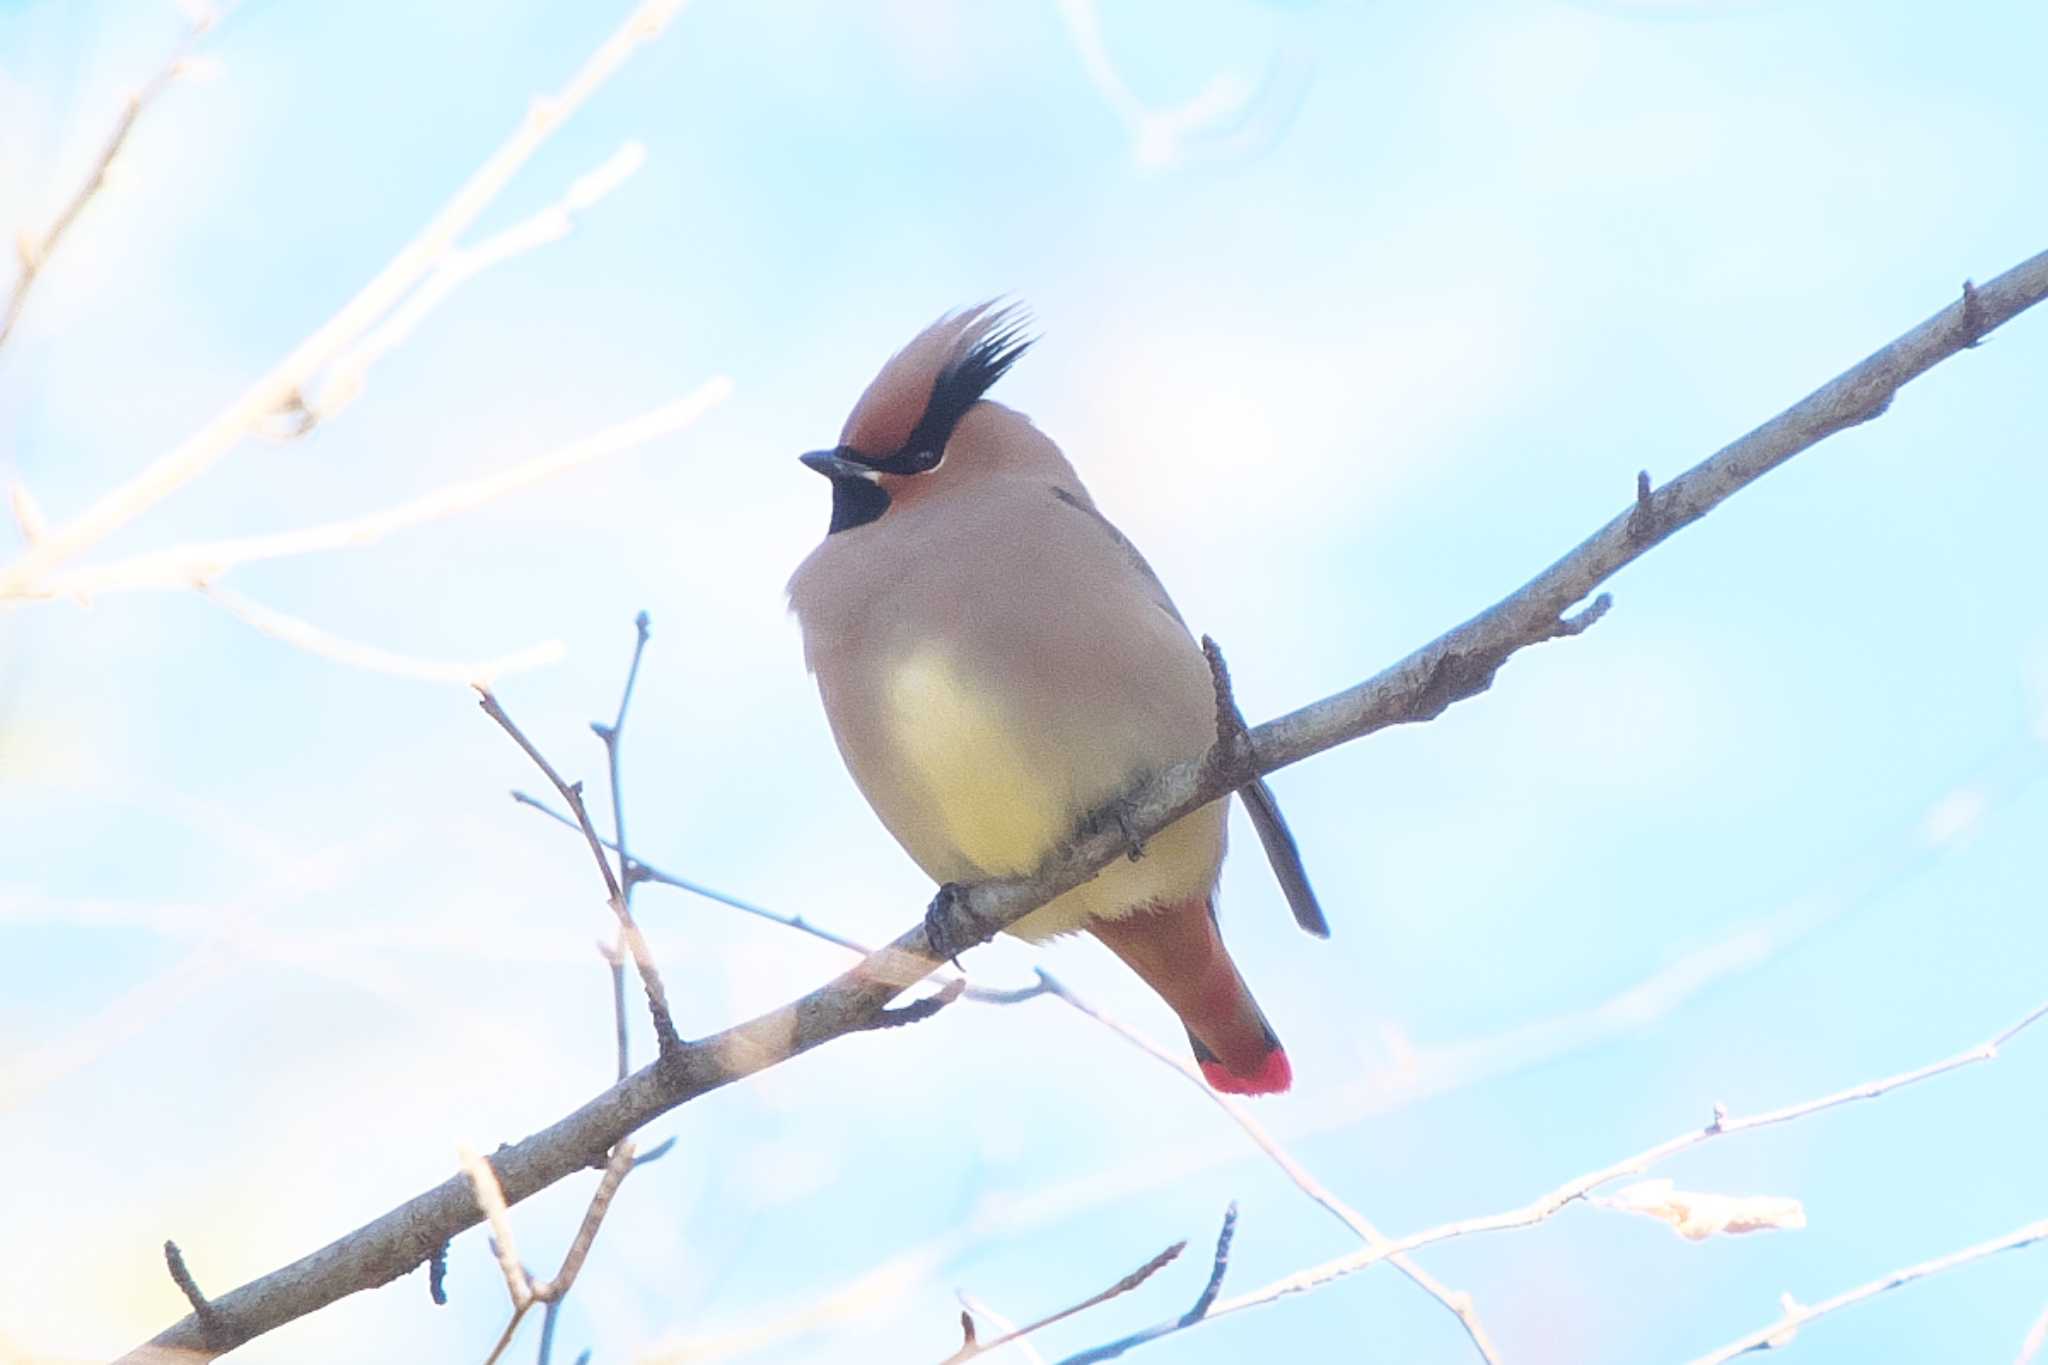 Photo of Japanese Waxwing at Kitamoto Nature Observation Park by Y. Watanabe